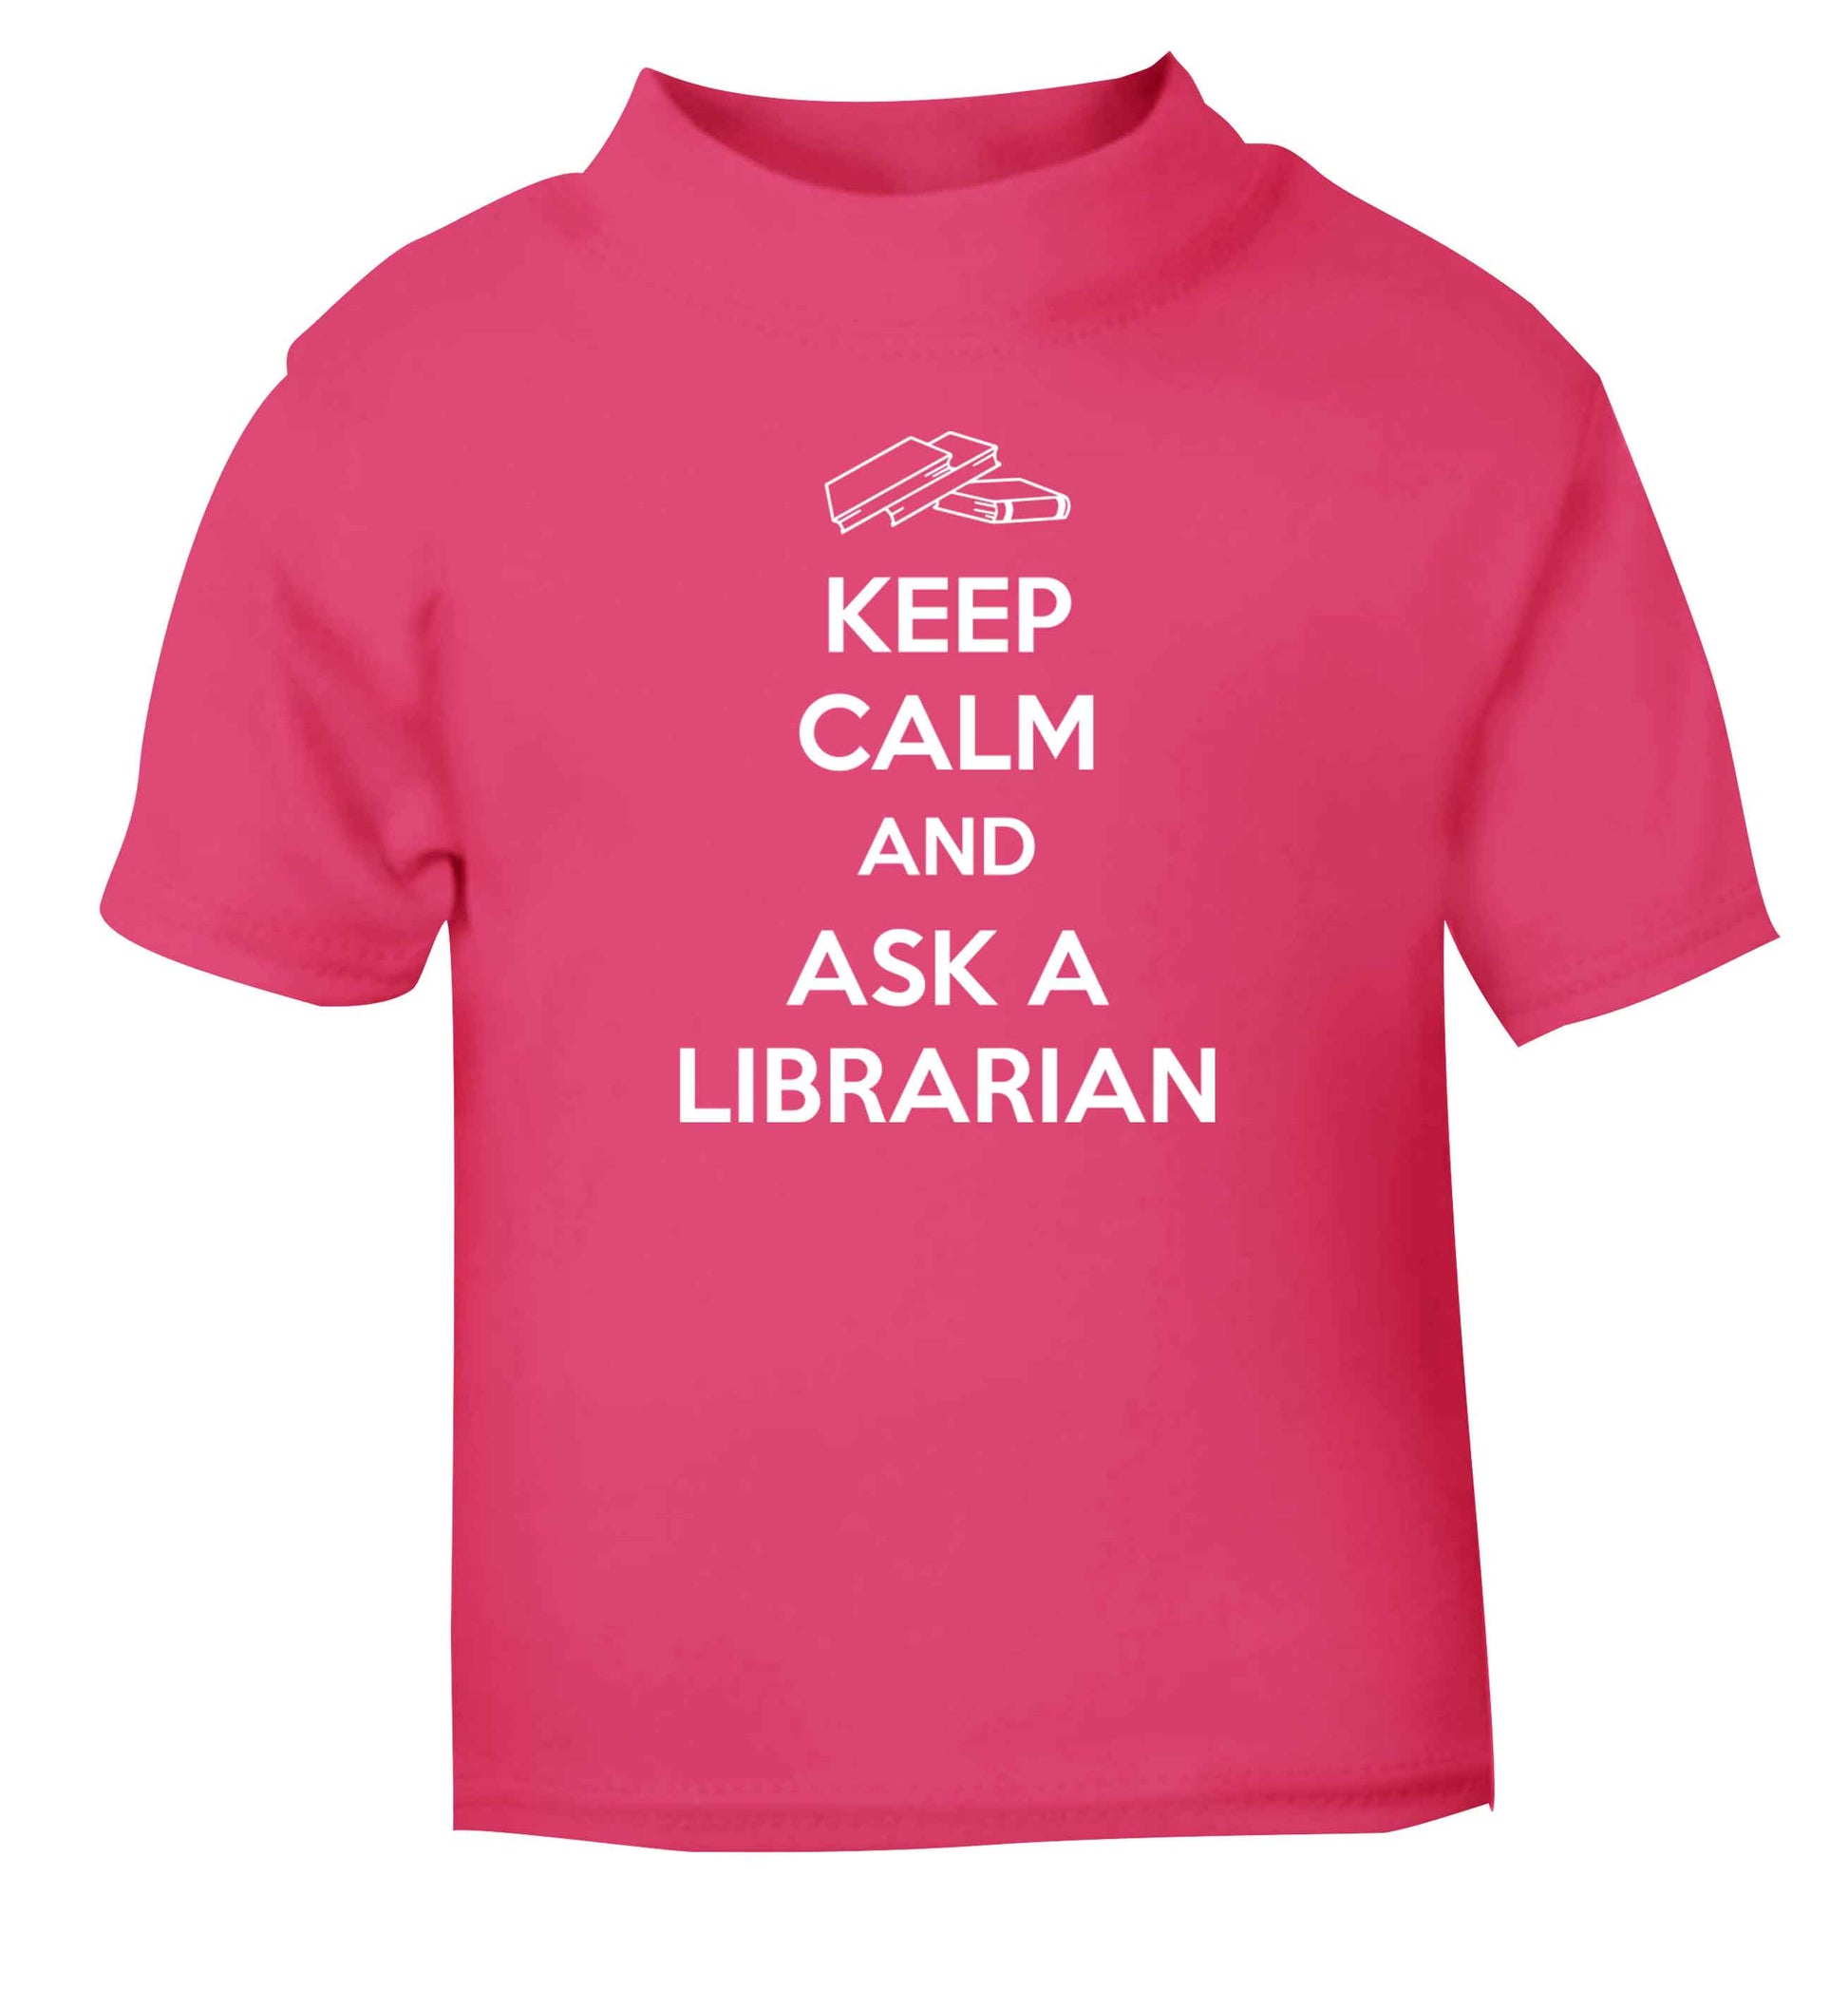 Keep calm and ask a librarian pink Baby Toddler Tshirt 2 Years